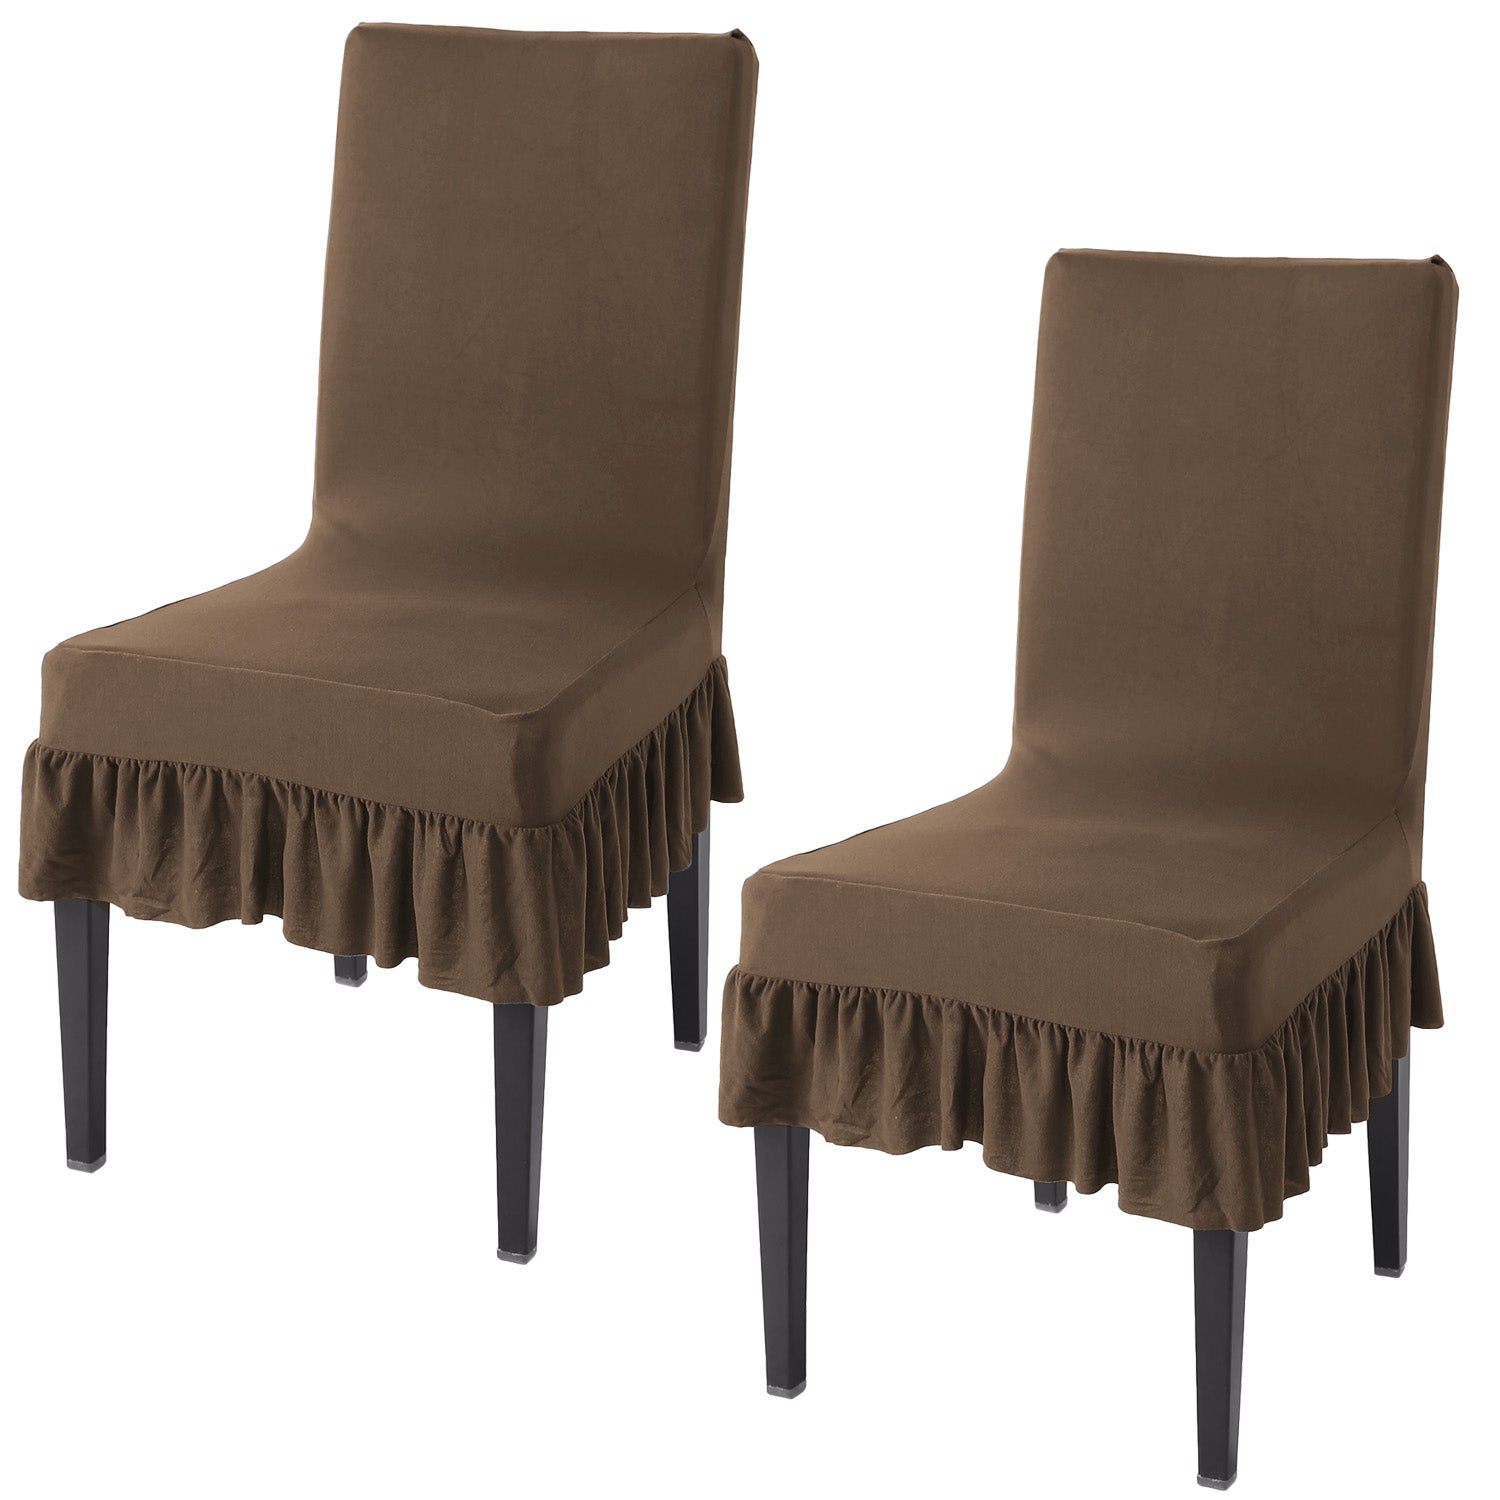 Elastic Stretchable Dining Chair Cover with Frill, Coffee Brown